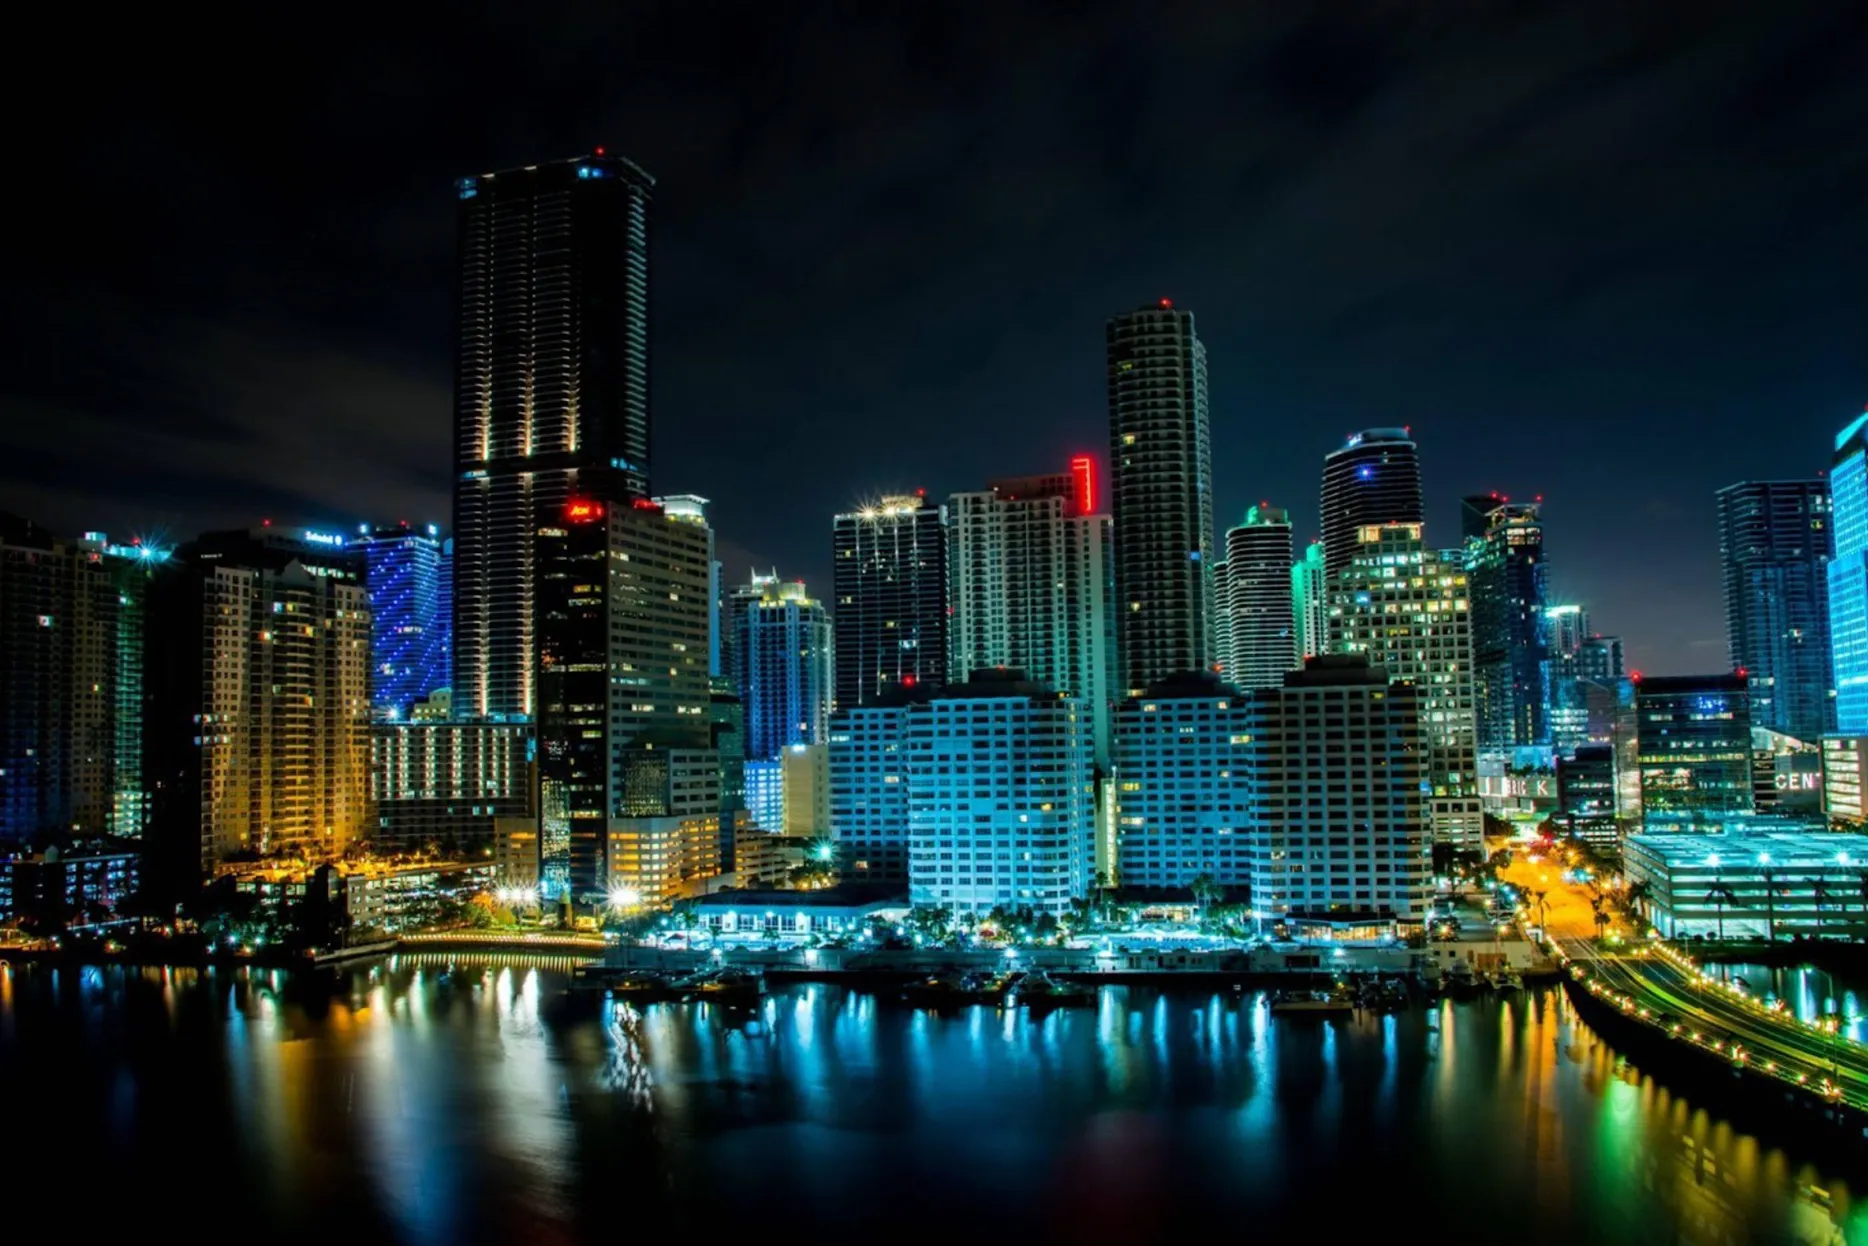 The skyscrapers of Downtown Miami are brilliantly lit up in shades of bright blue under the cover of the night sky